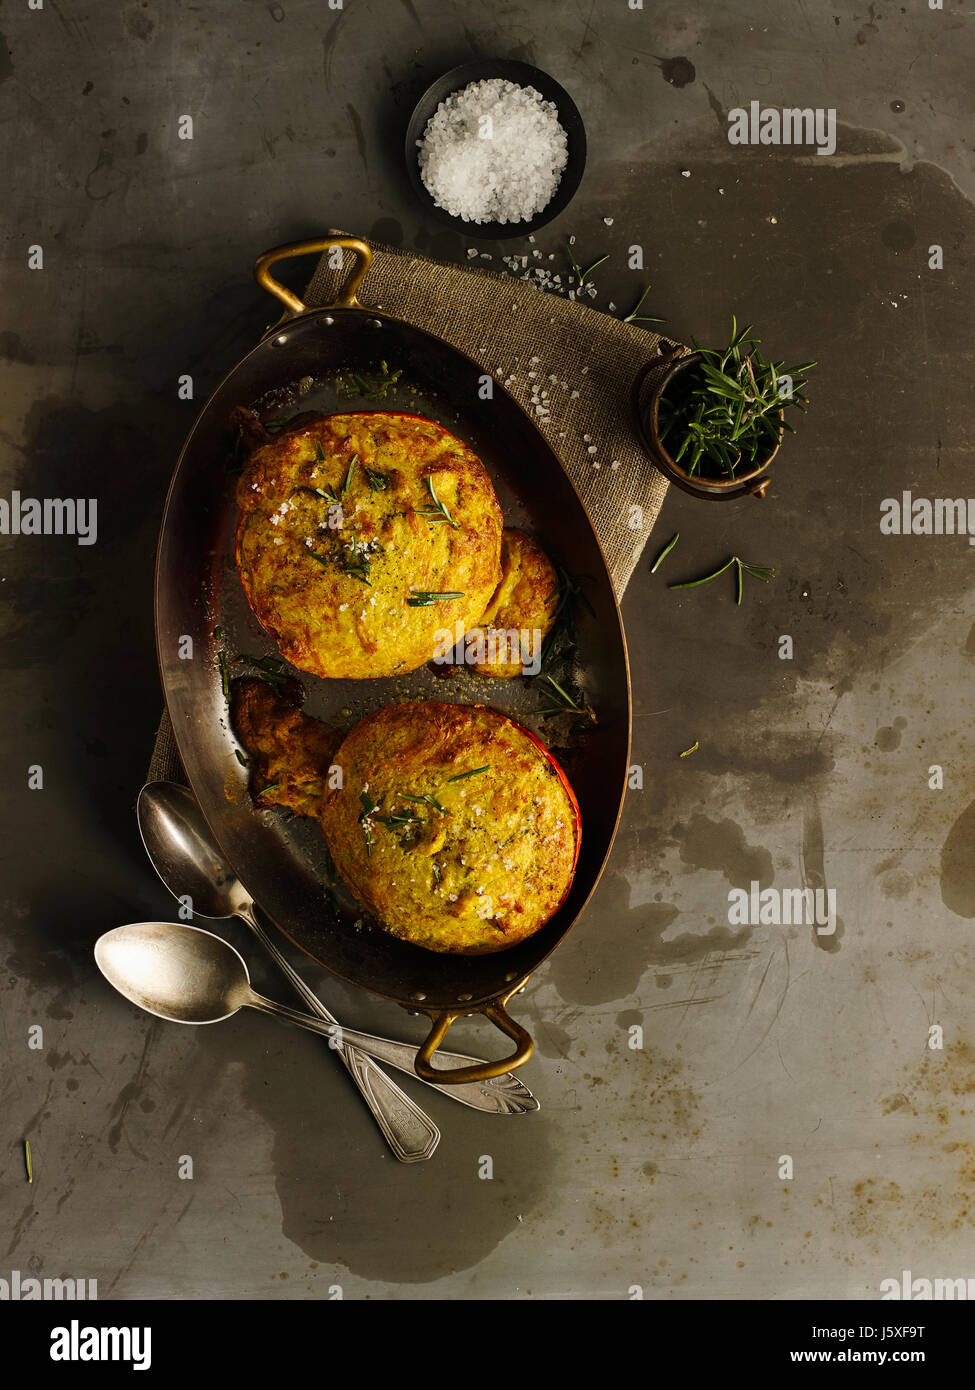 Filled pumpkin with parmesan and herbs Stock Photo